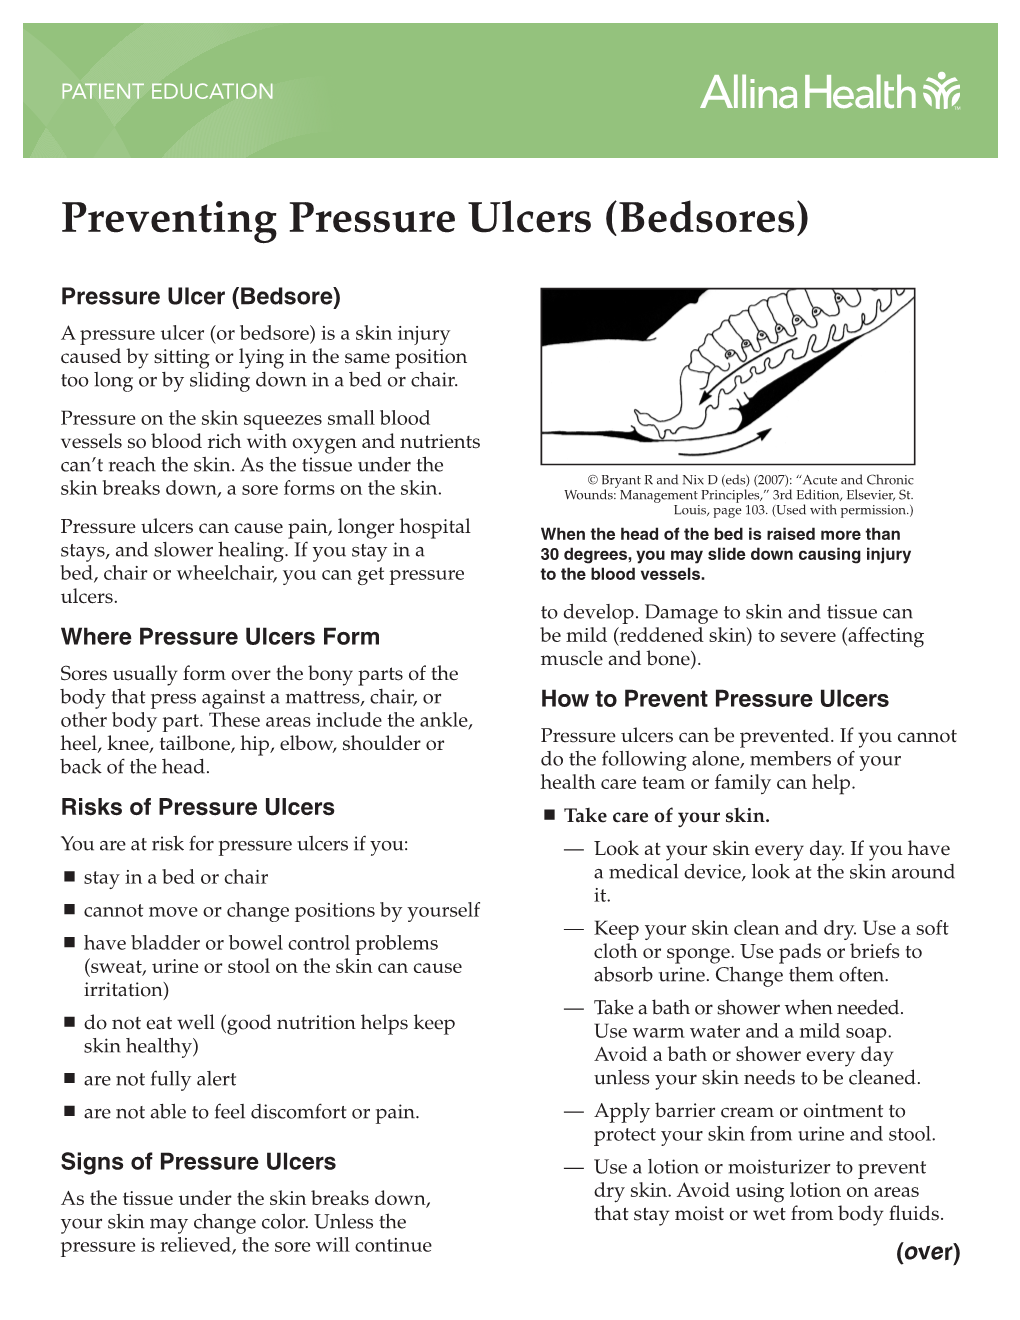 Preventing Pressure Ulcers (Bedsores)